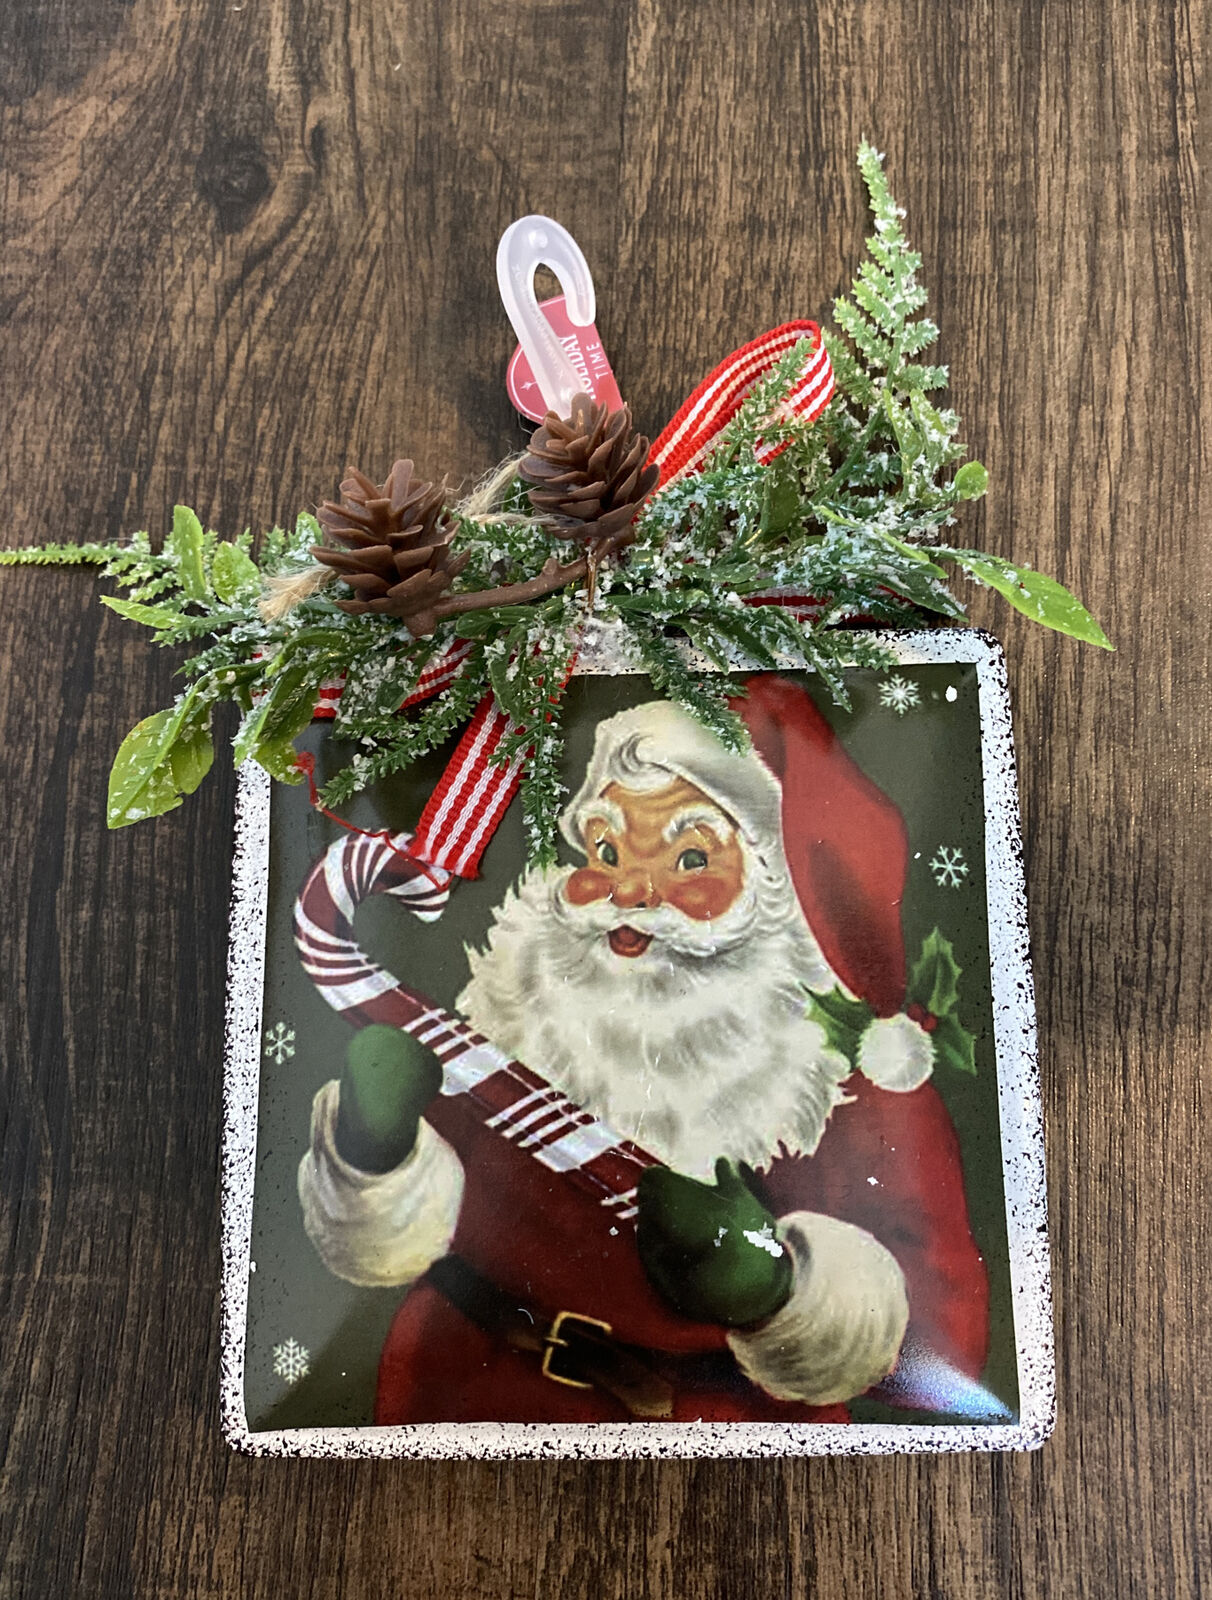 Santa Claus Christmas Ornament Metal Galvanized Steel Square 5in With Greenery